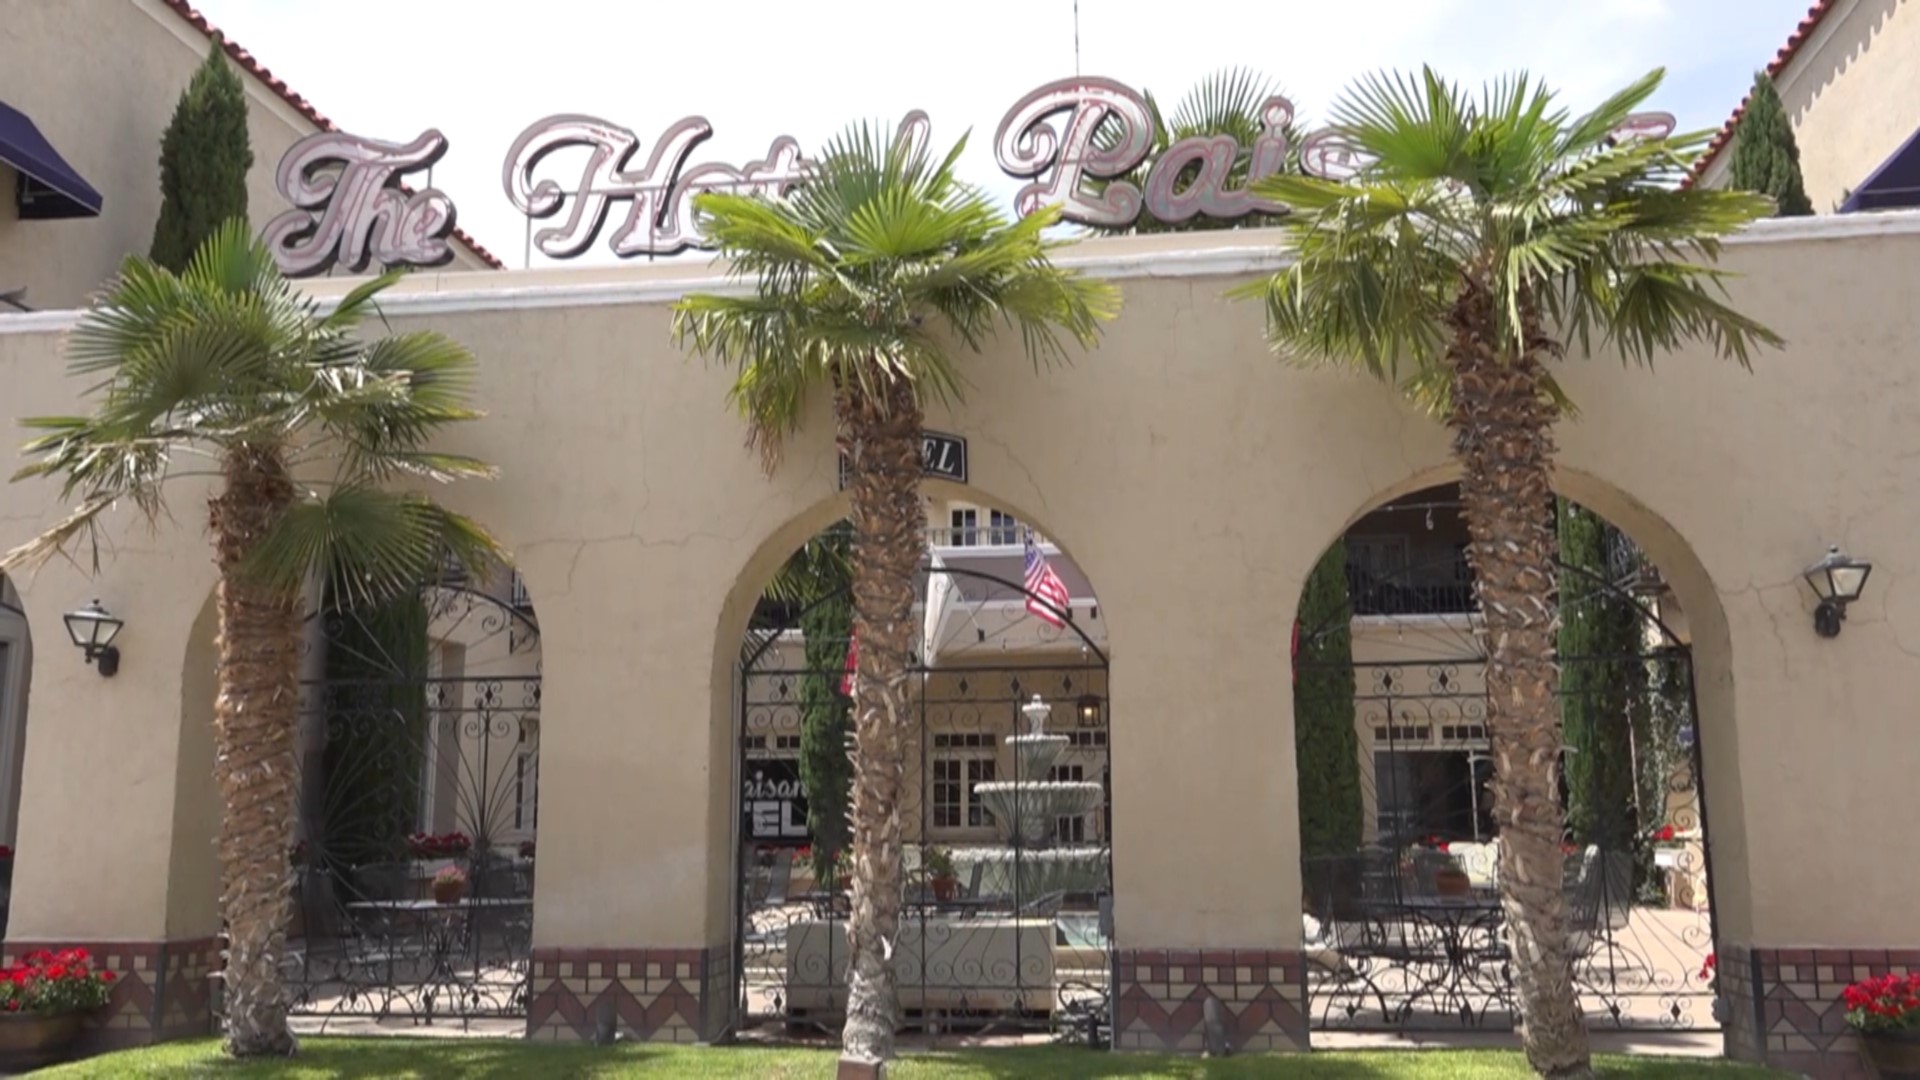 The Hotel Paisano has kept its original look with a few renovations. It's best known for the location where the cast of the 1955 film, Giant, stayed during shooting.